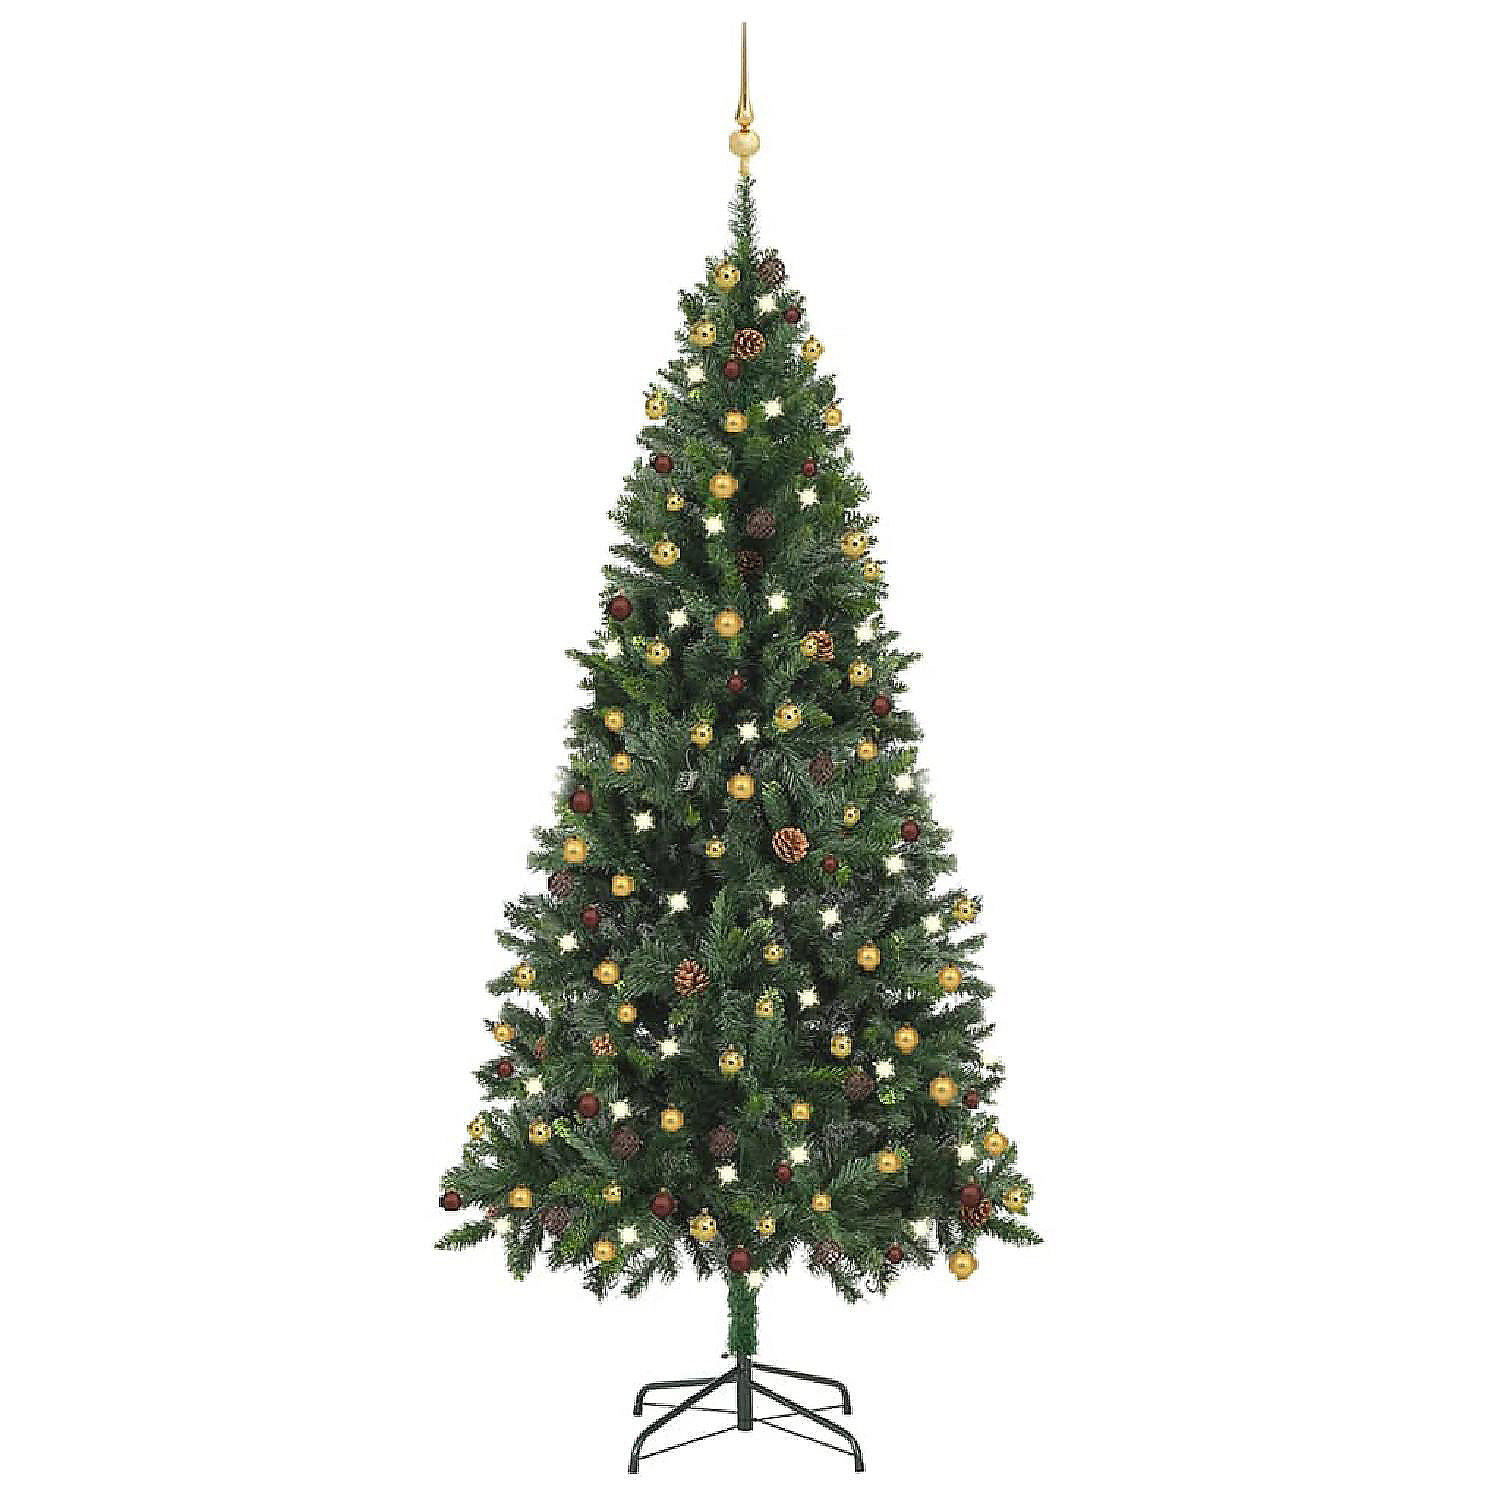 VidaXL 7' Green Artificial Christmas Tree with 300pc LED Lights & 120pc ...